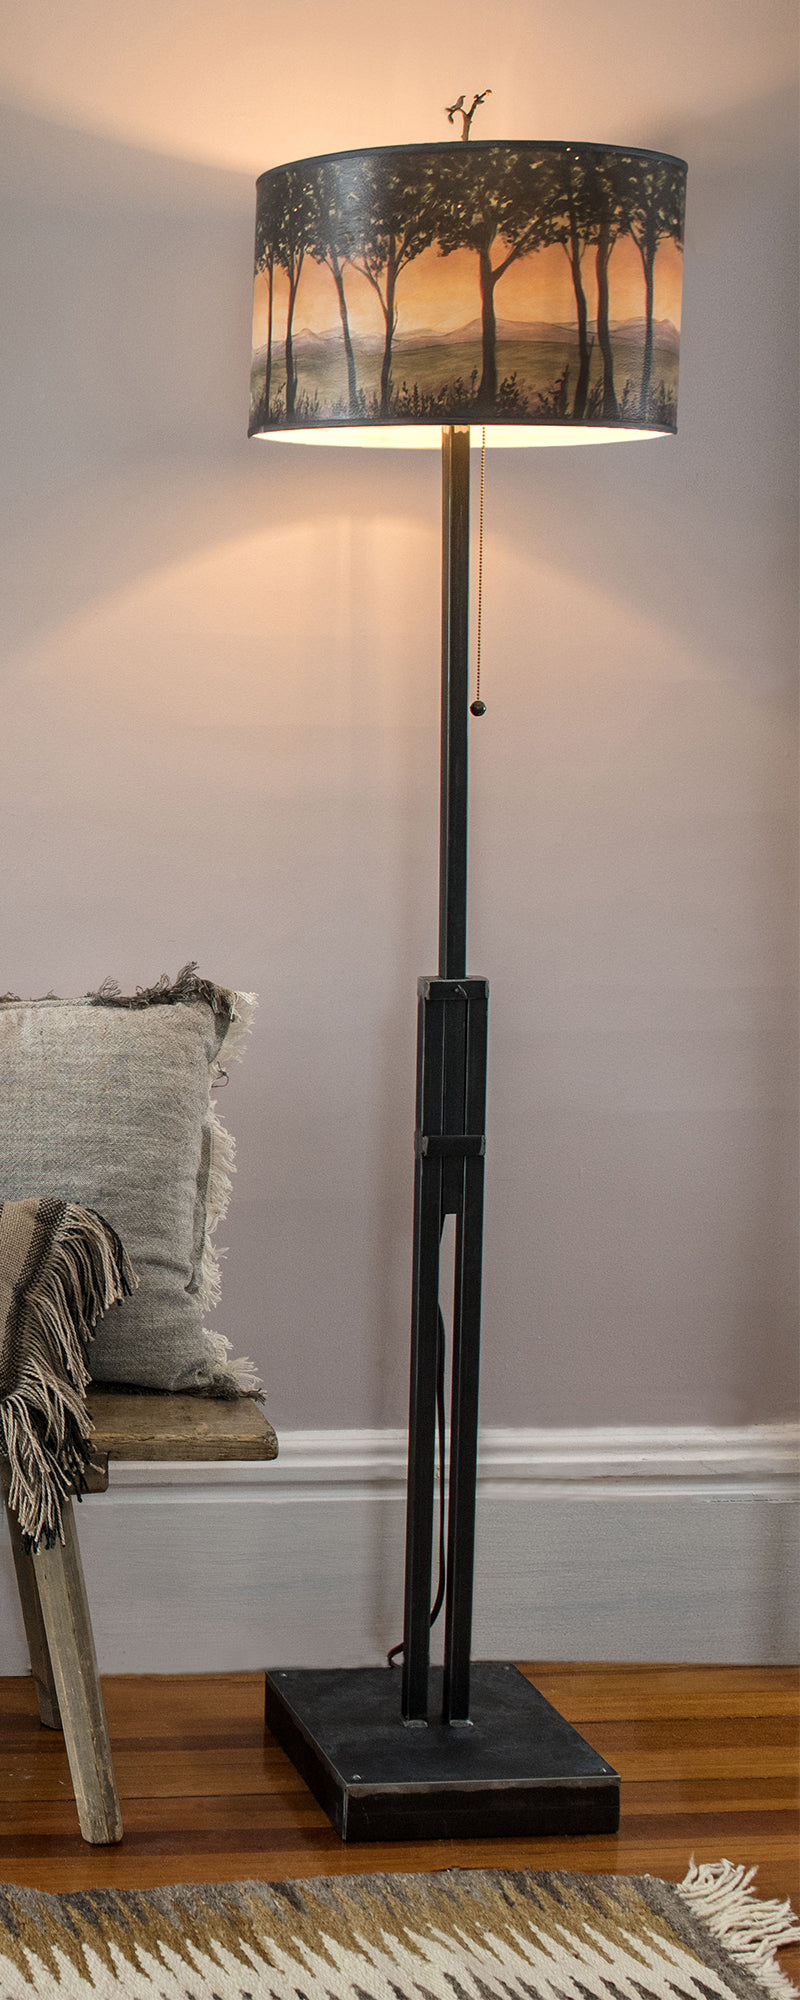 Janna Ugone & Co Floor Lamps Adjustable-Height Steel Floor Lamp with Large Drum Shade in Dawn